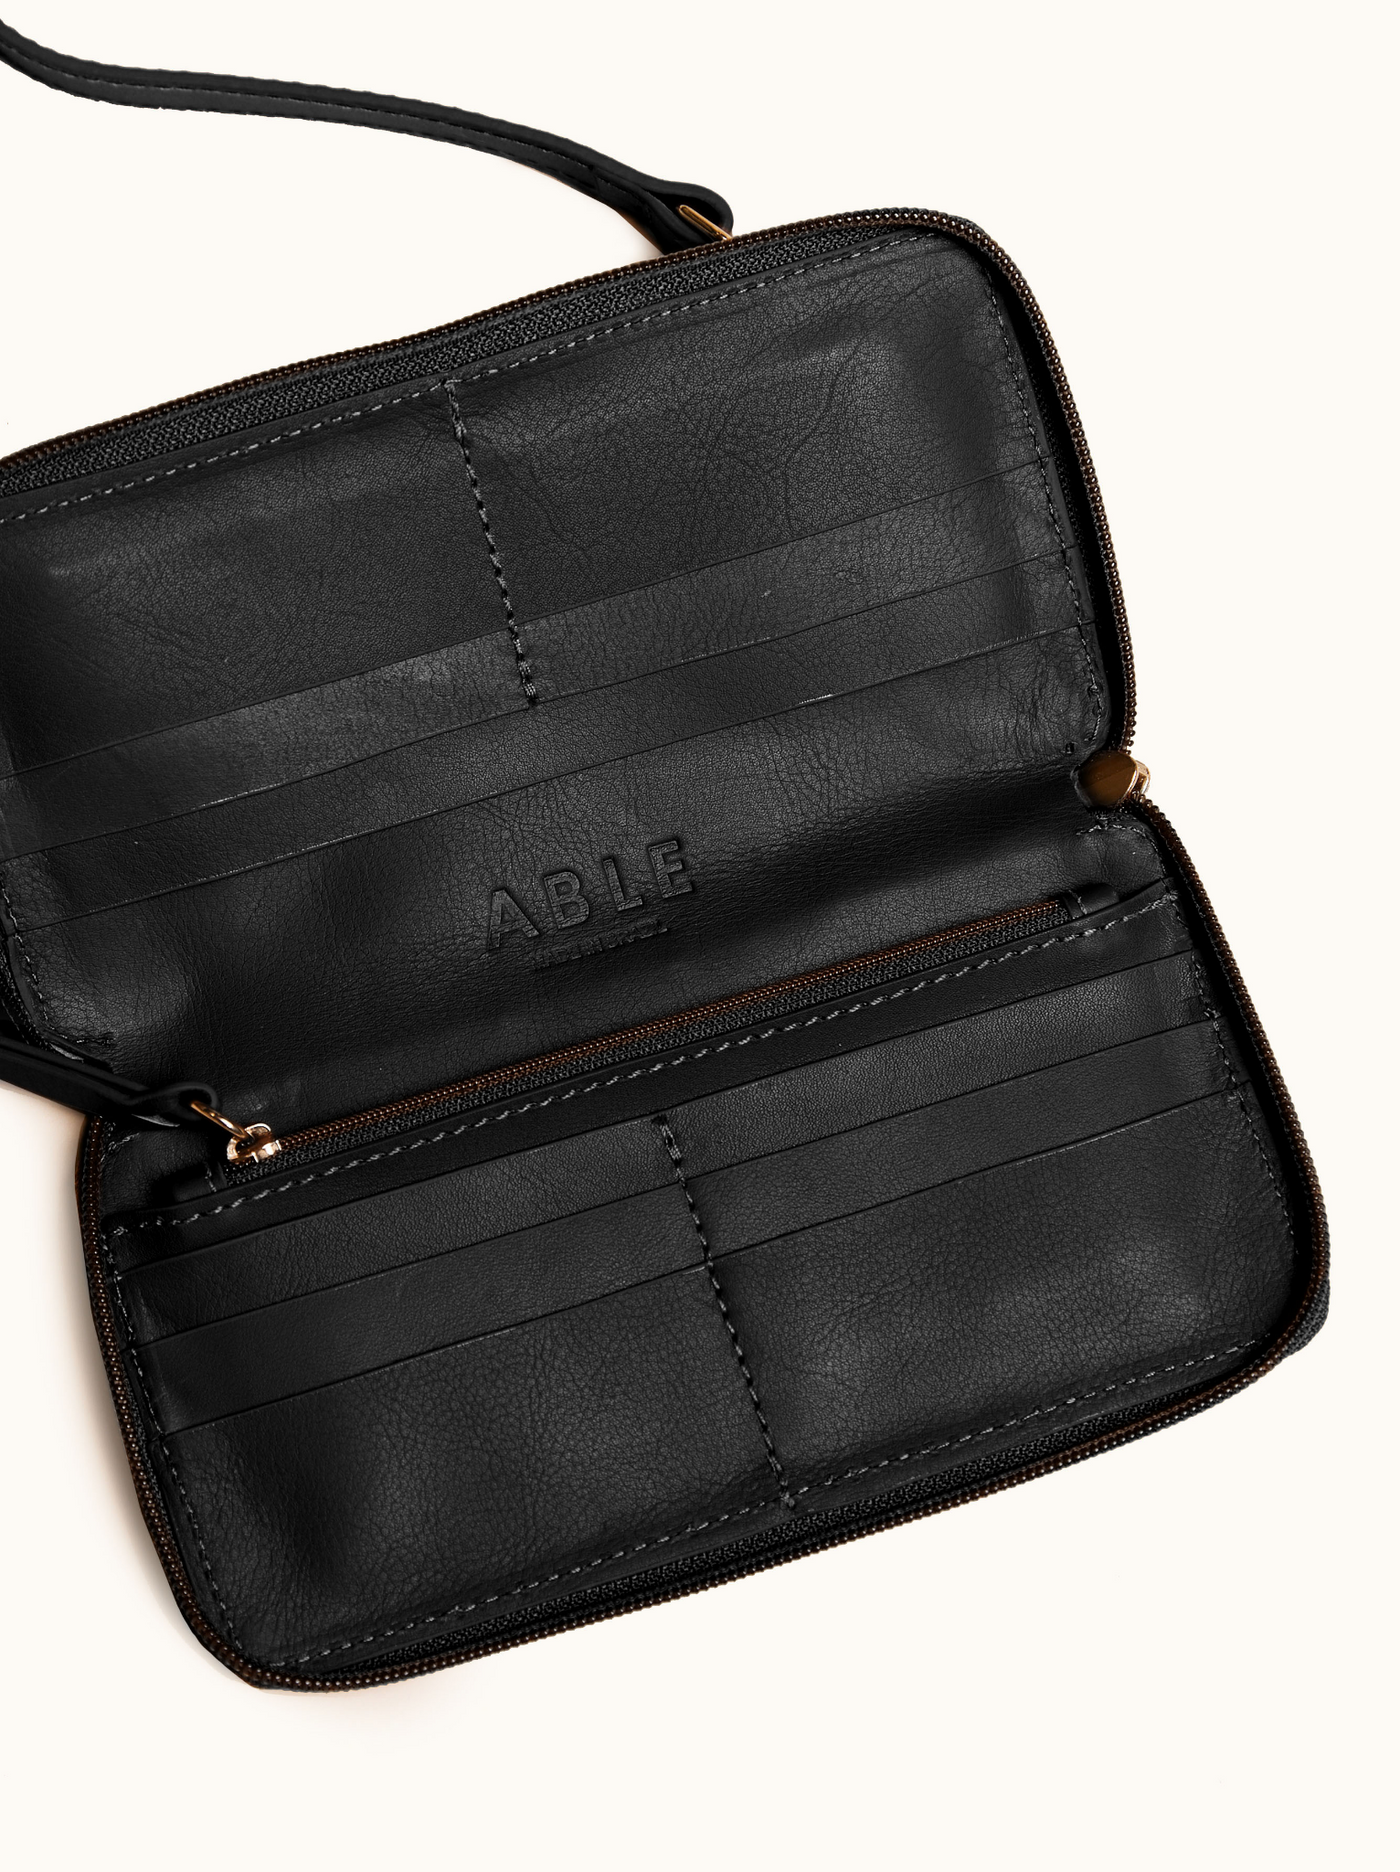 Able Amerie Continental Wallet - Black